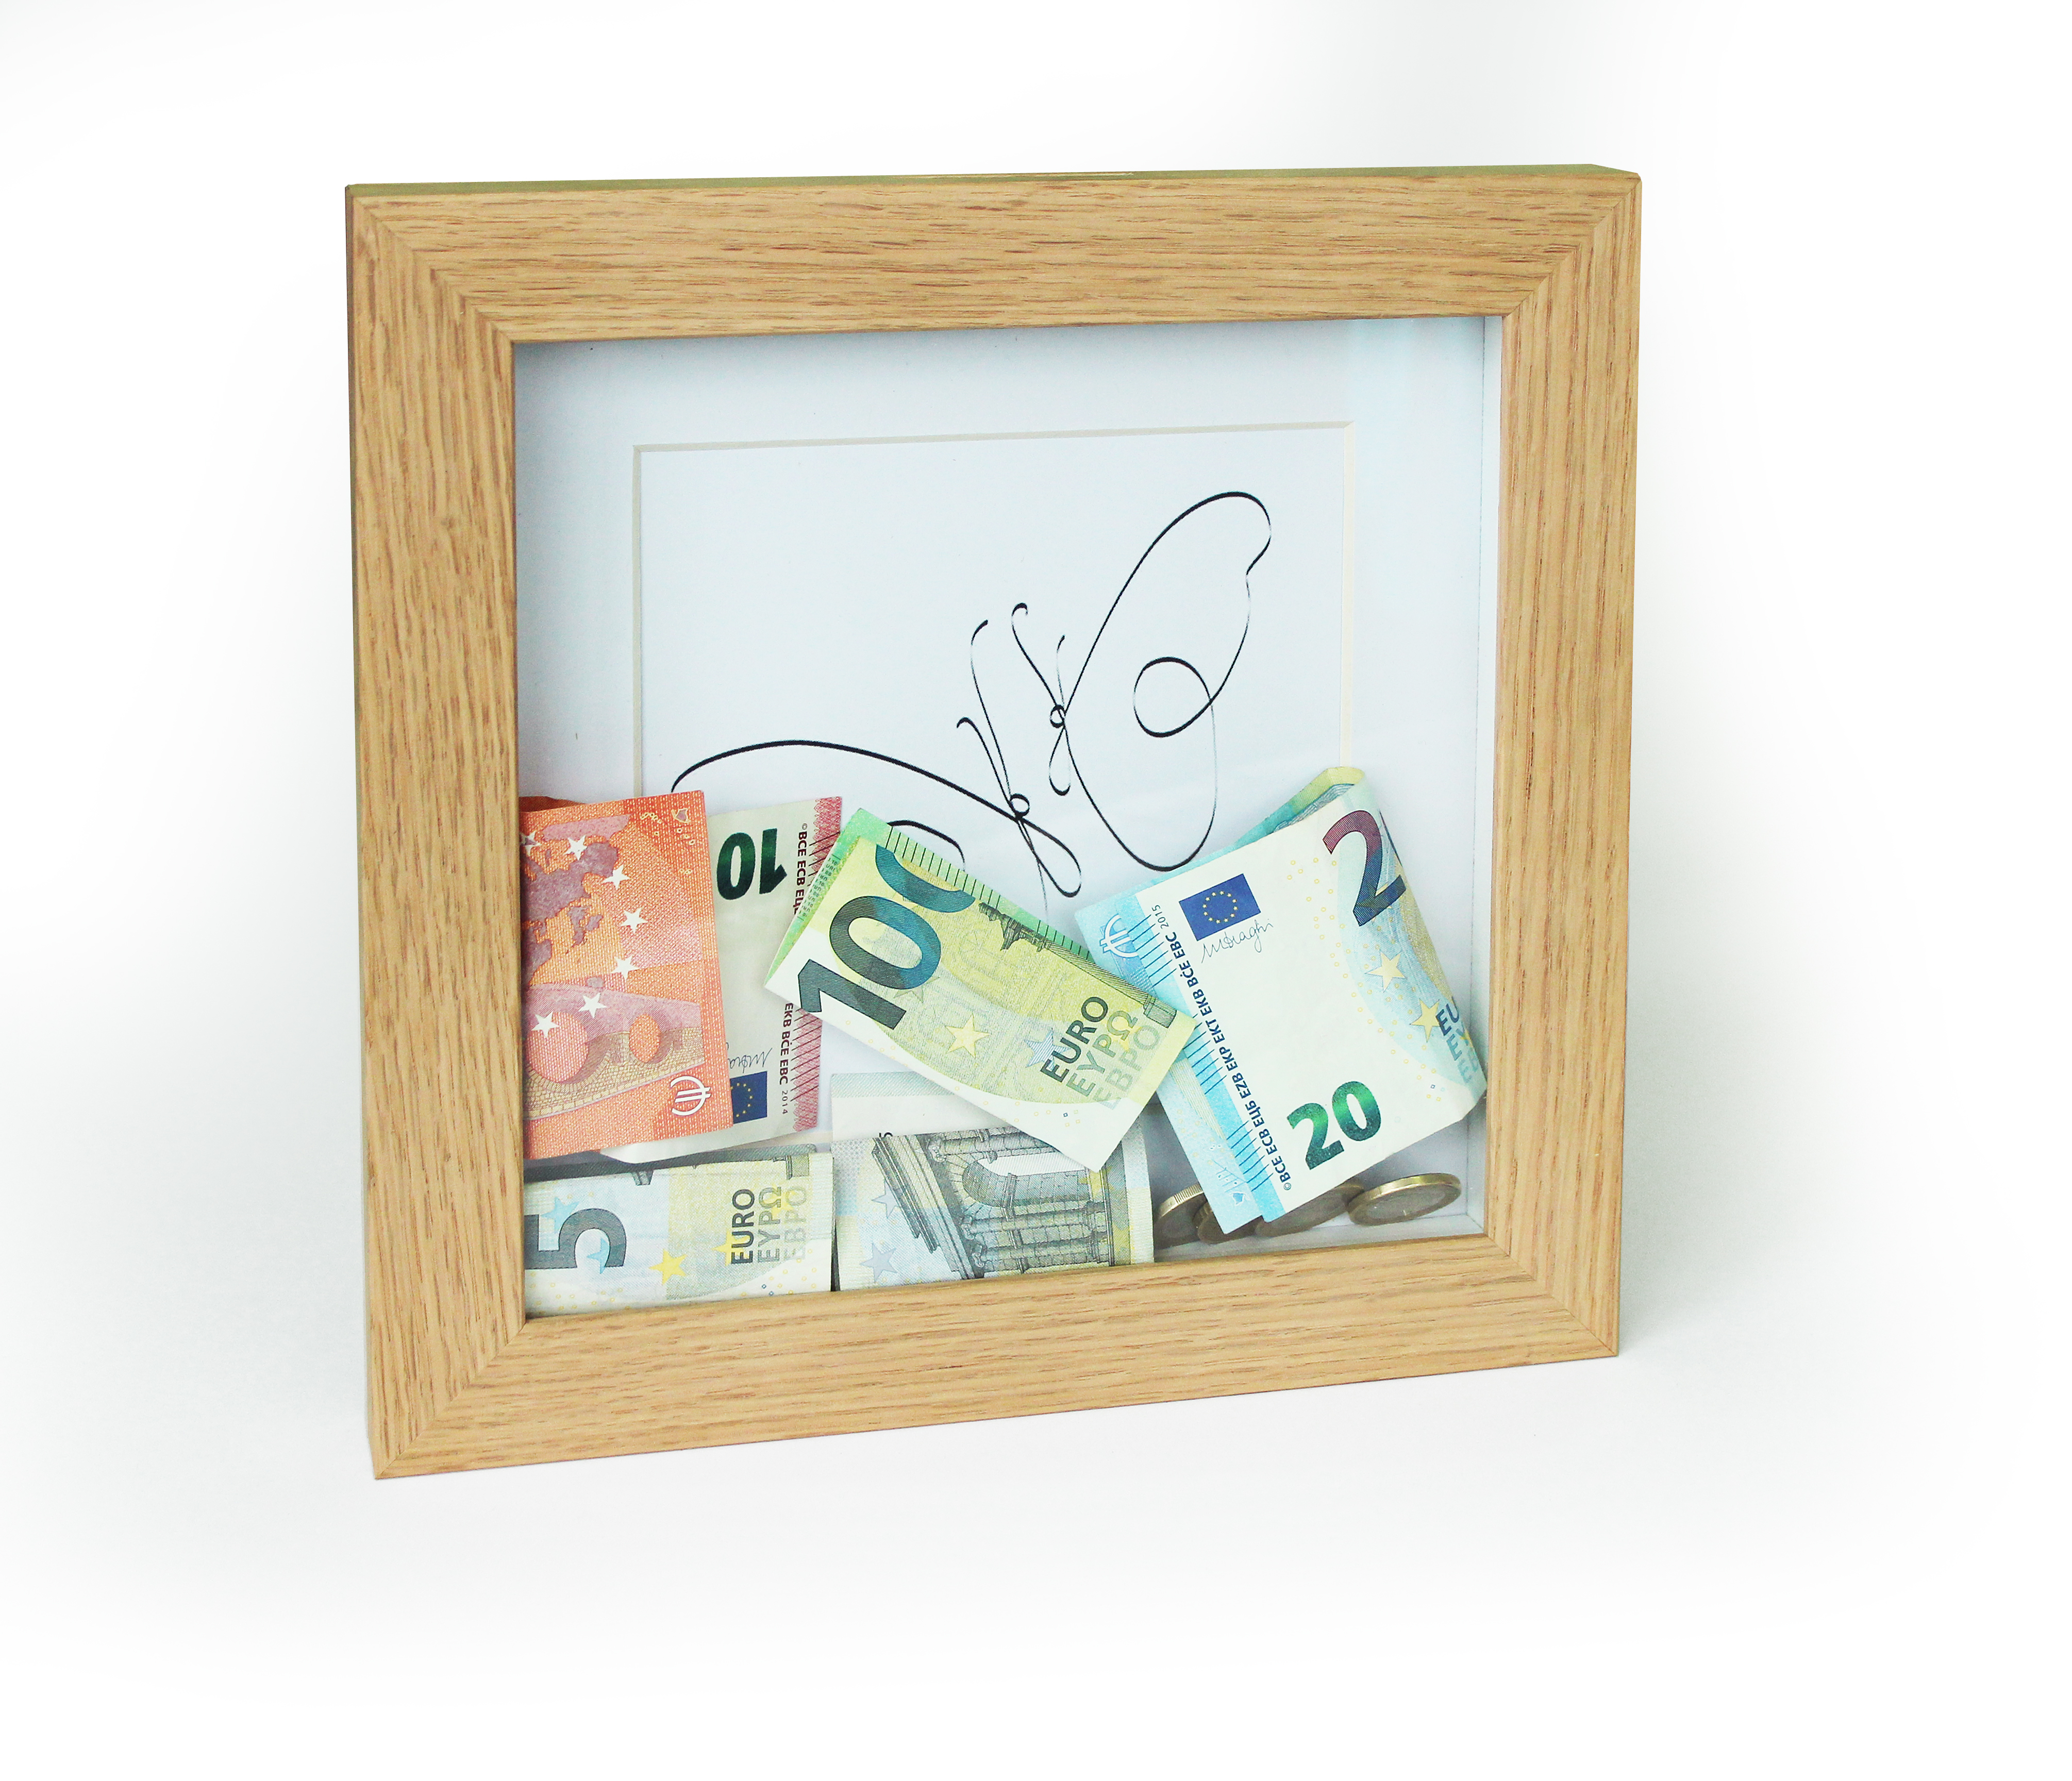 Oak wood frame made as money box, with 3D effect and slot for coins, banknotes, or messages. Picture frame producer Debex Suisse.